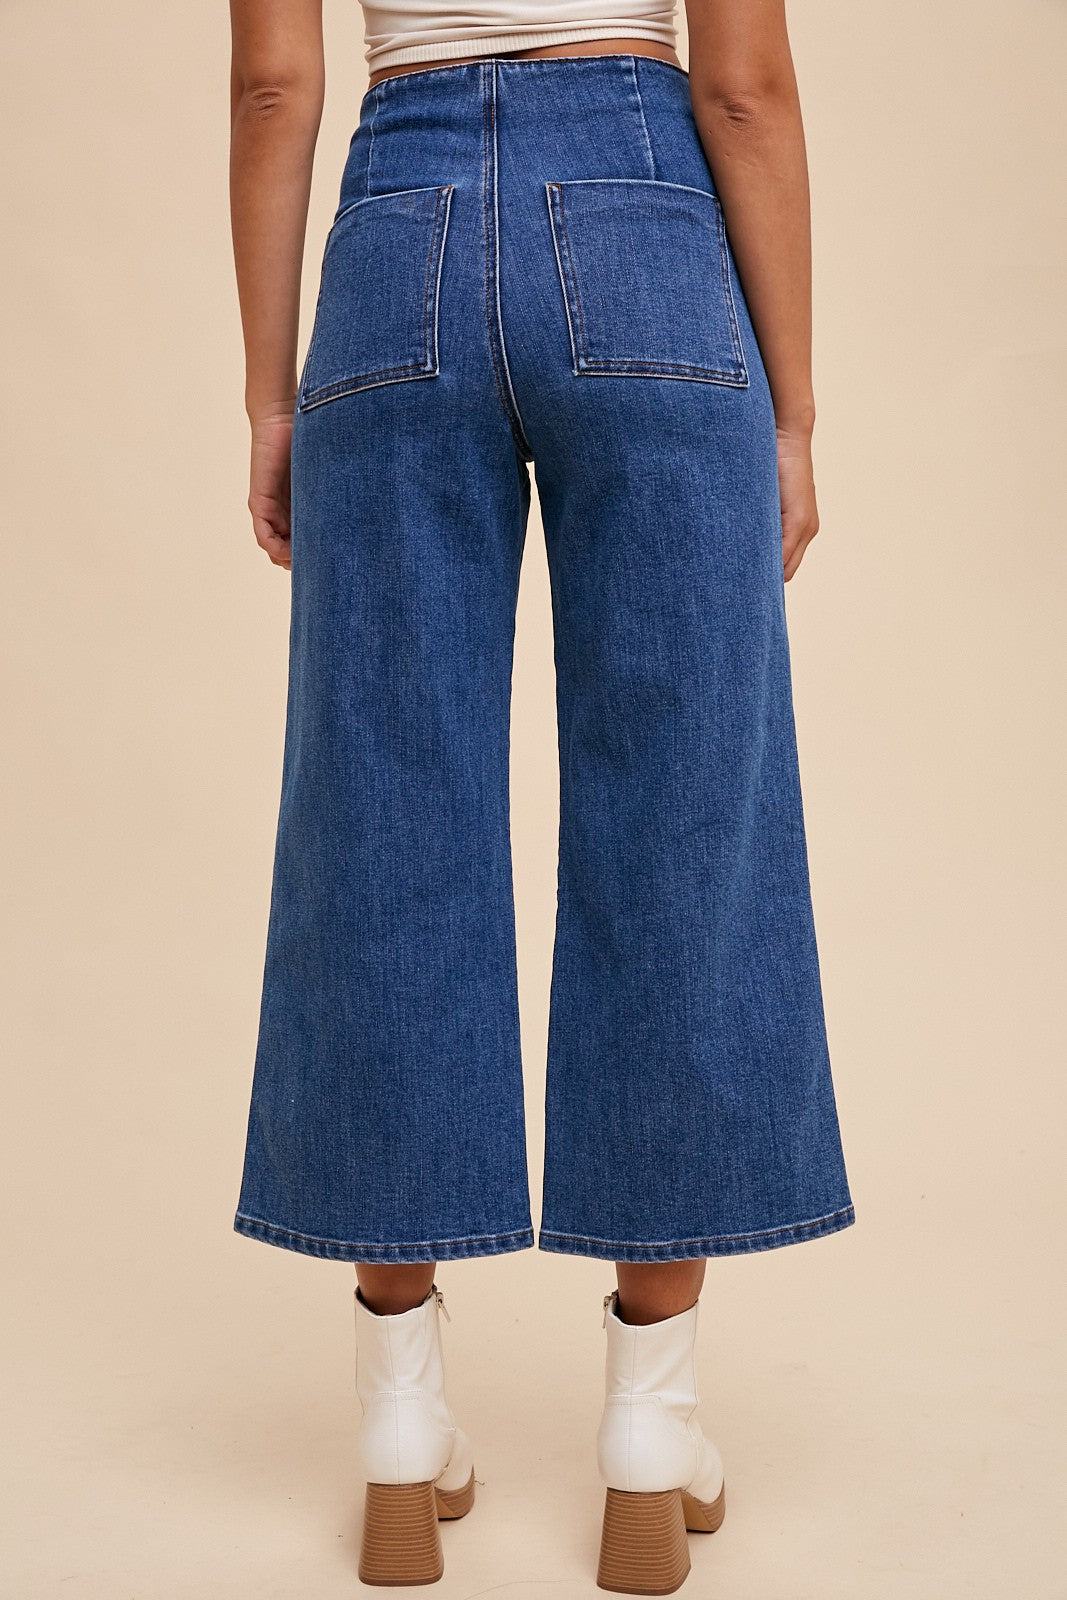 The Corey High Rise Jeans